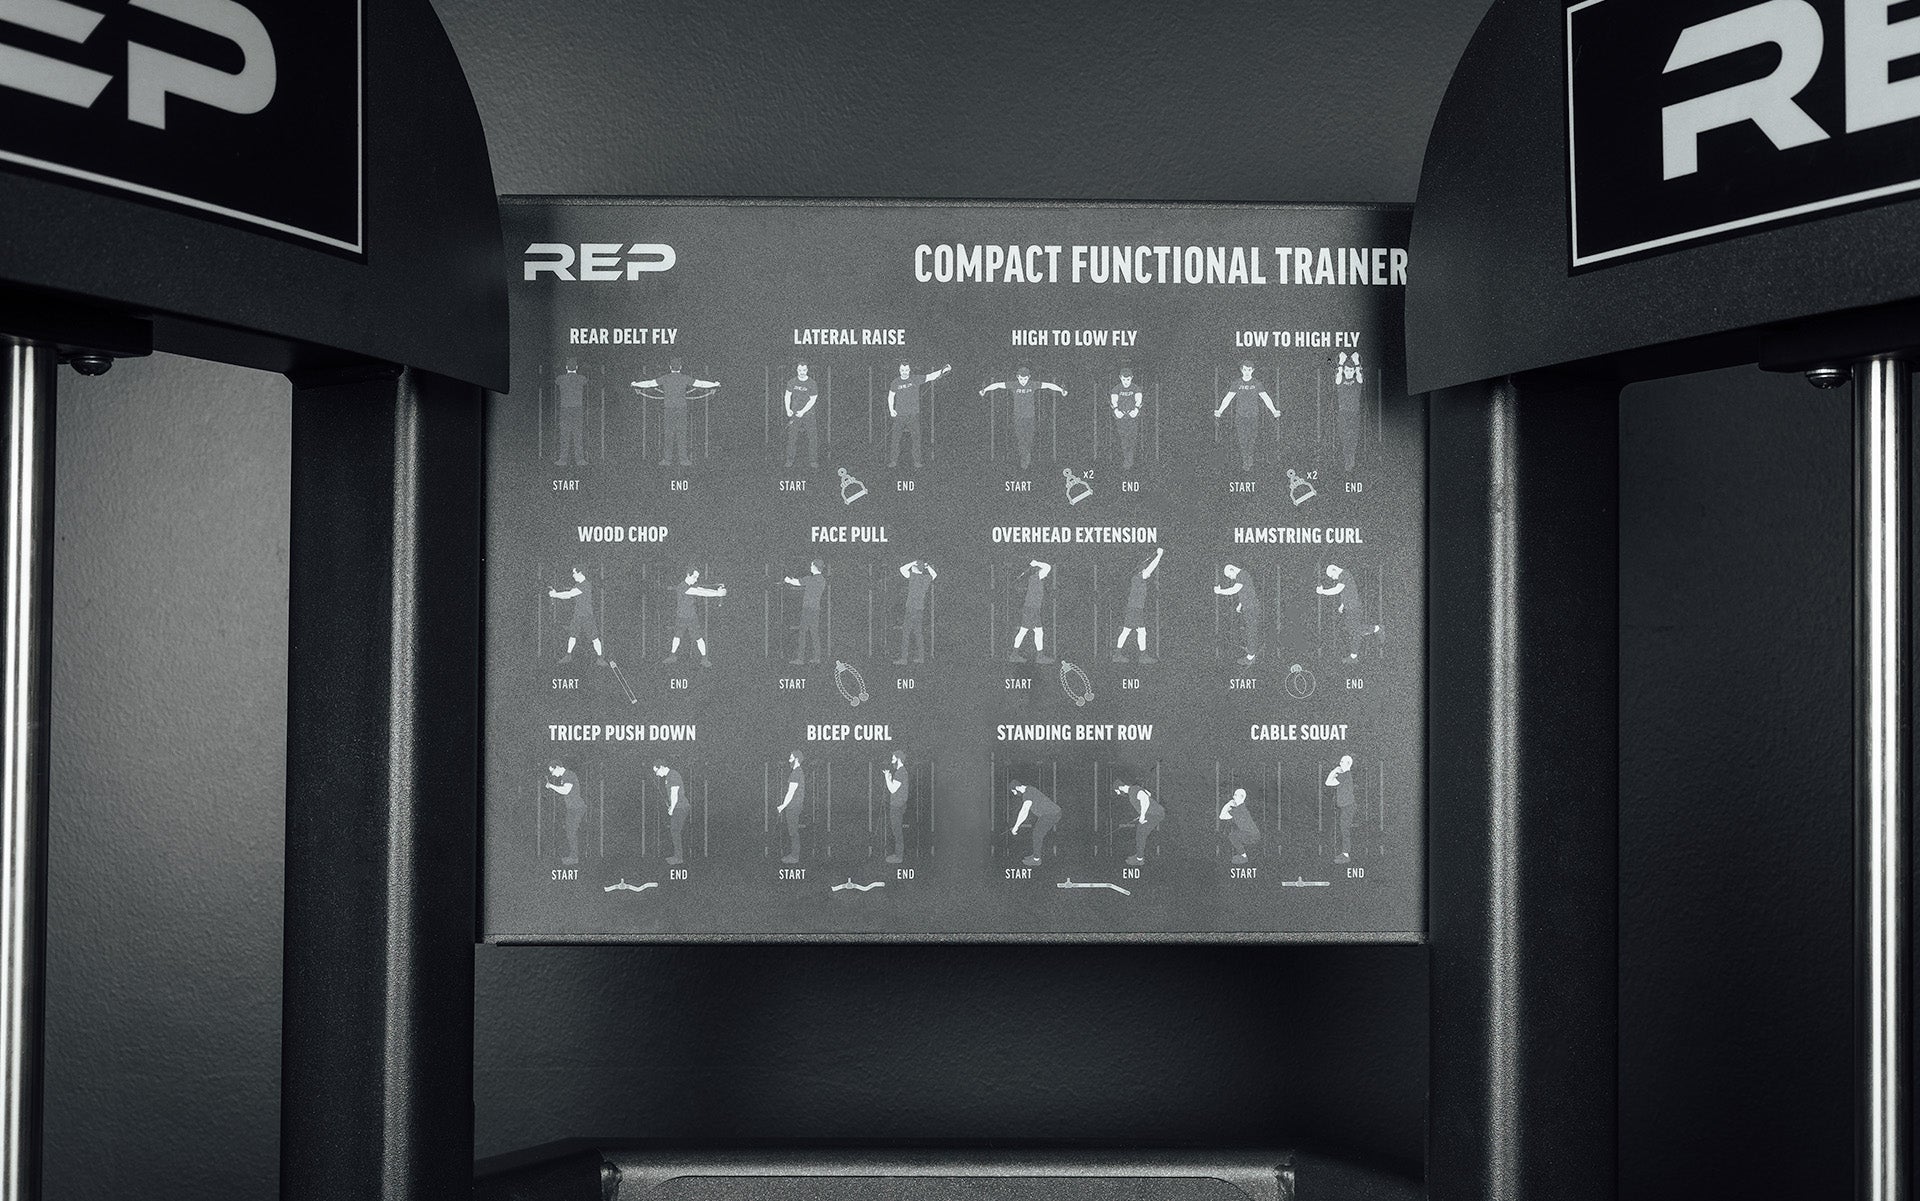 FT-3000 Compact Functional Trainer 2.0 Close Up of Exercise Diagram Showing Rear Delt Fly, Lateral Raise, High to Low Fly, Low to High Fly, Wood Chop, Face Pull, Overhead Extension, Hamstring Curl, Tricep Push Down, Bicep Curl, Standing Bent Row, and Cable Squat